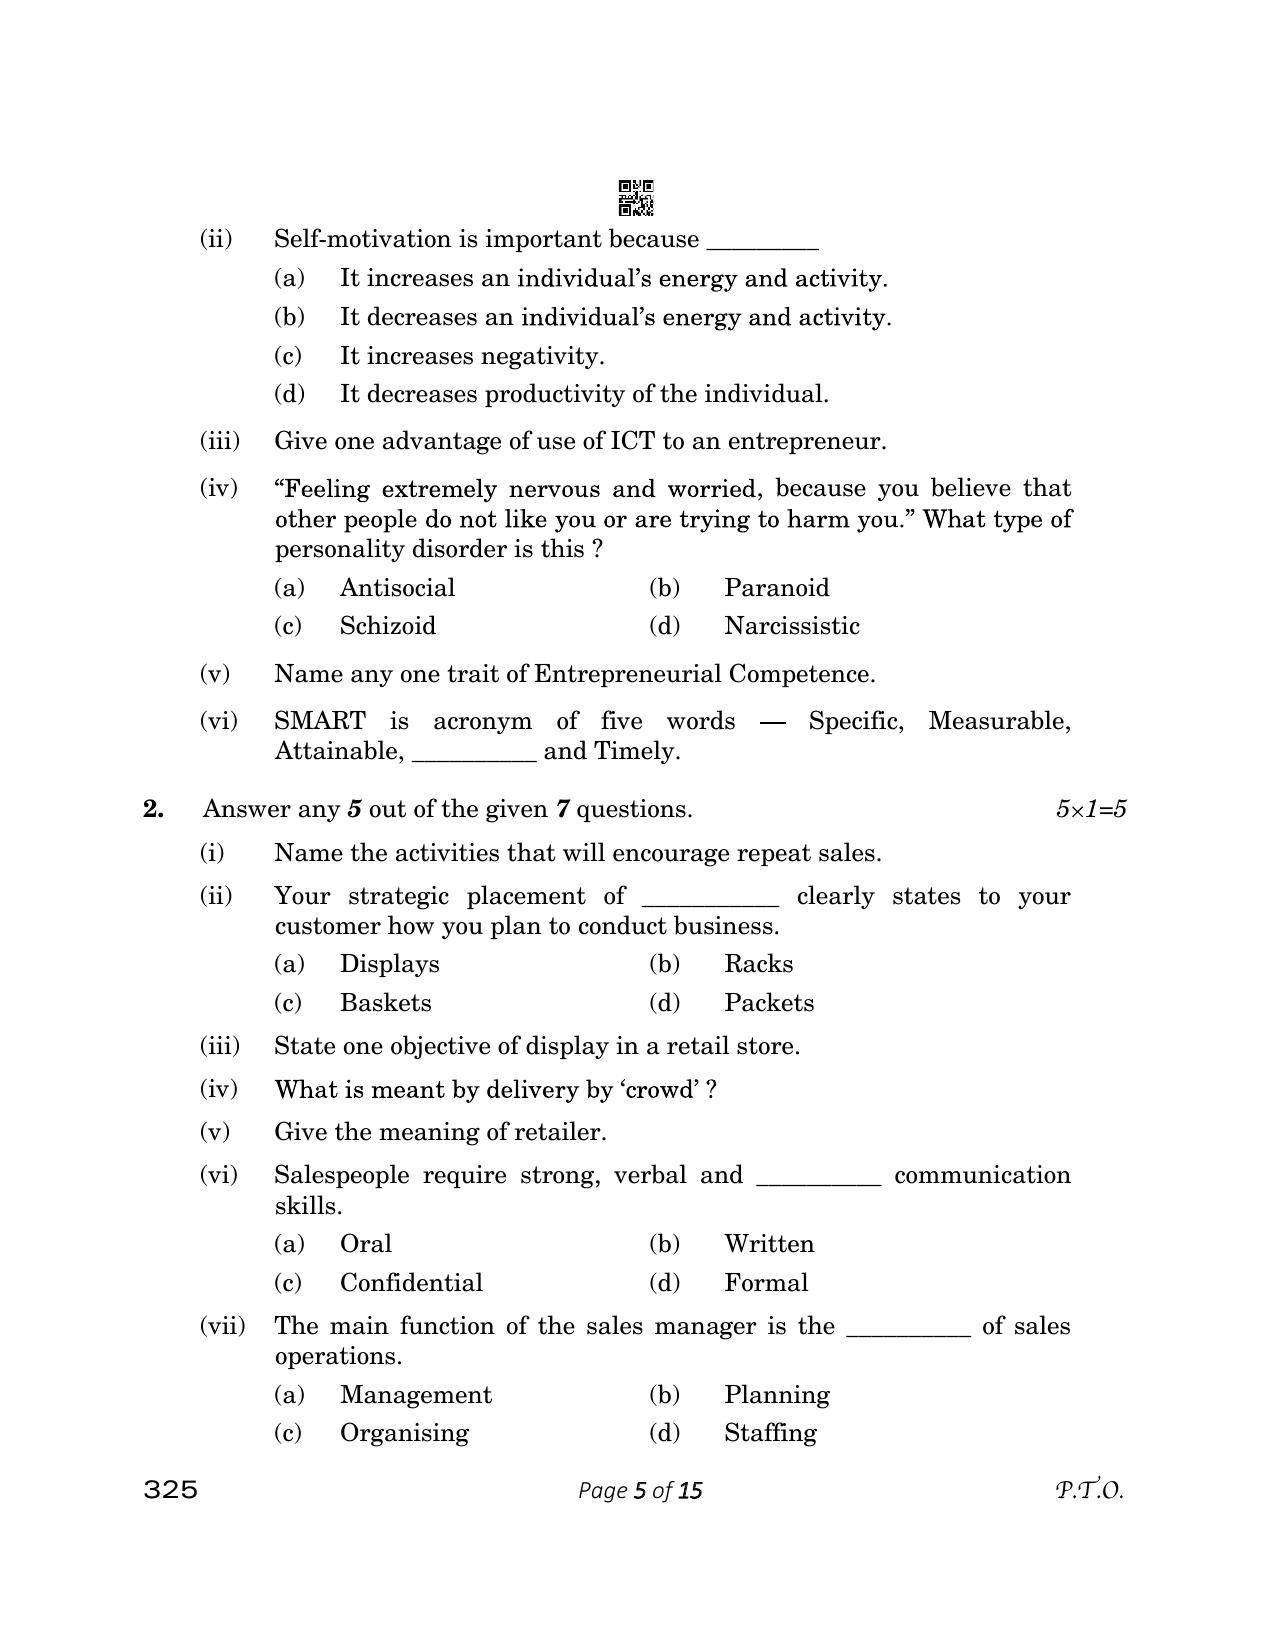 CBSE Class 12 325 Retail 2023 Question Paper - Page 5